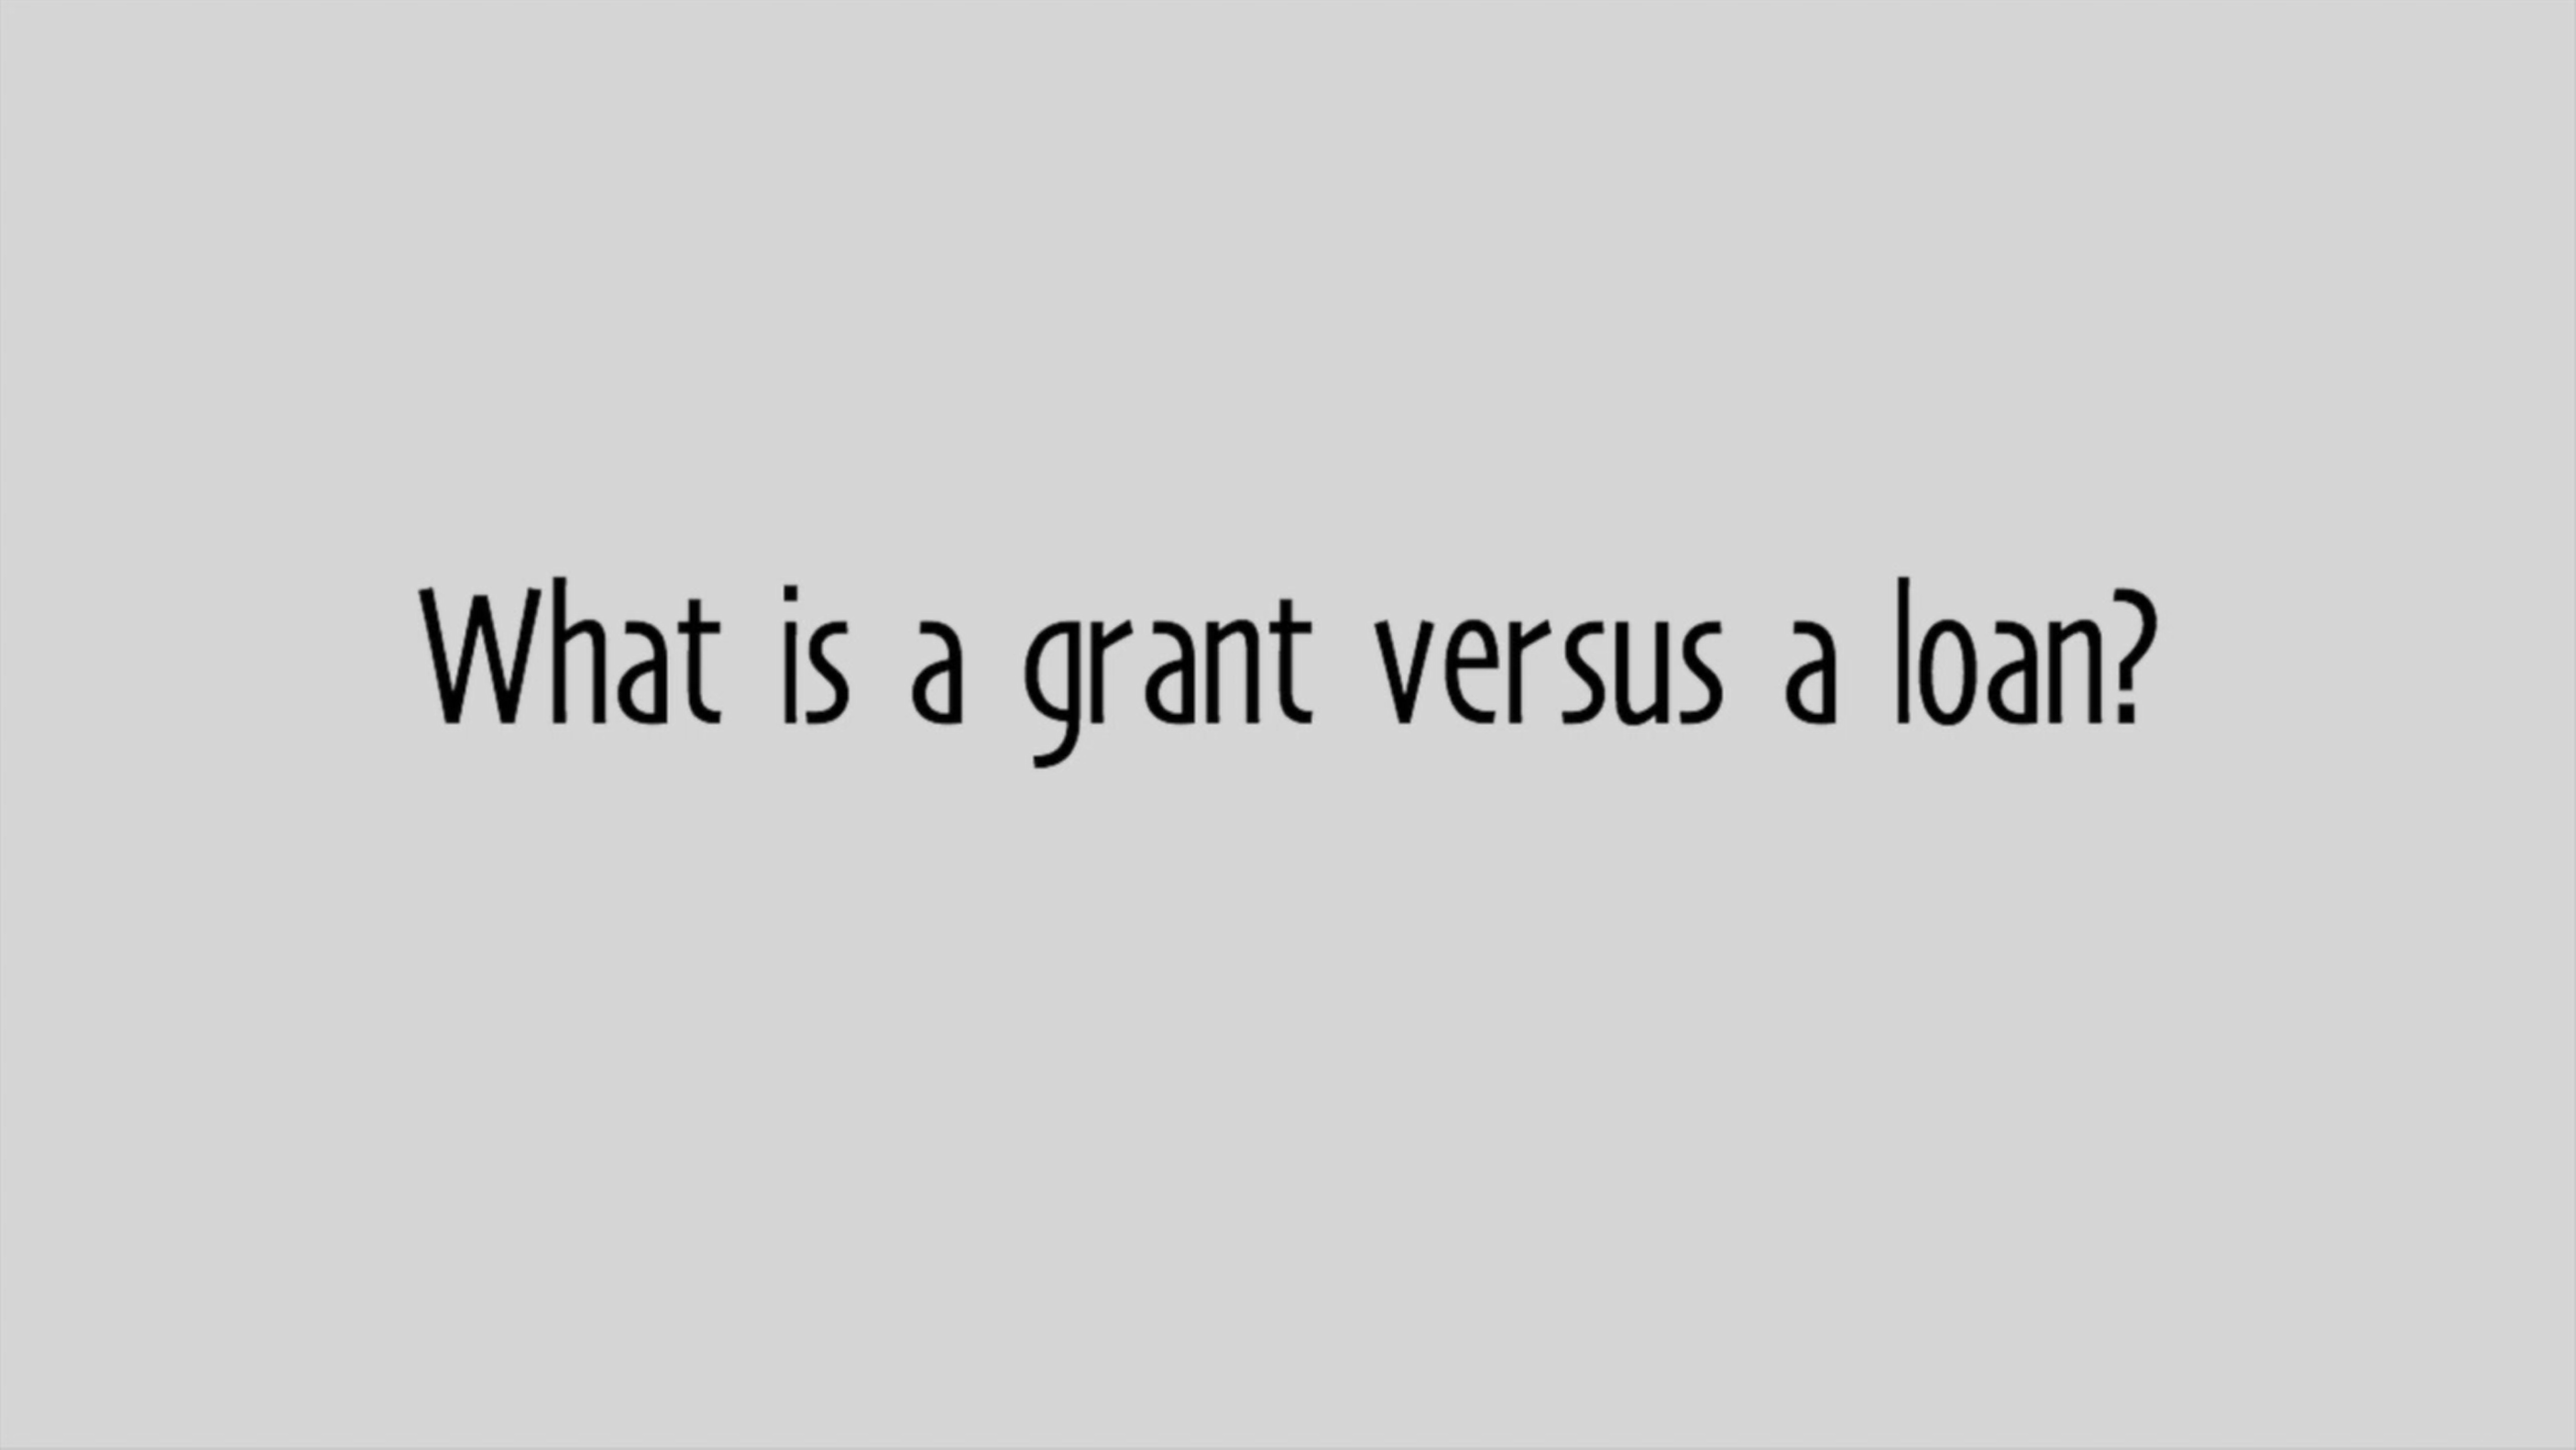 Play 'What is a grant versus a loan?'